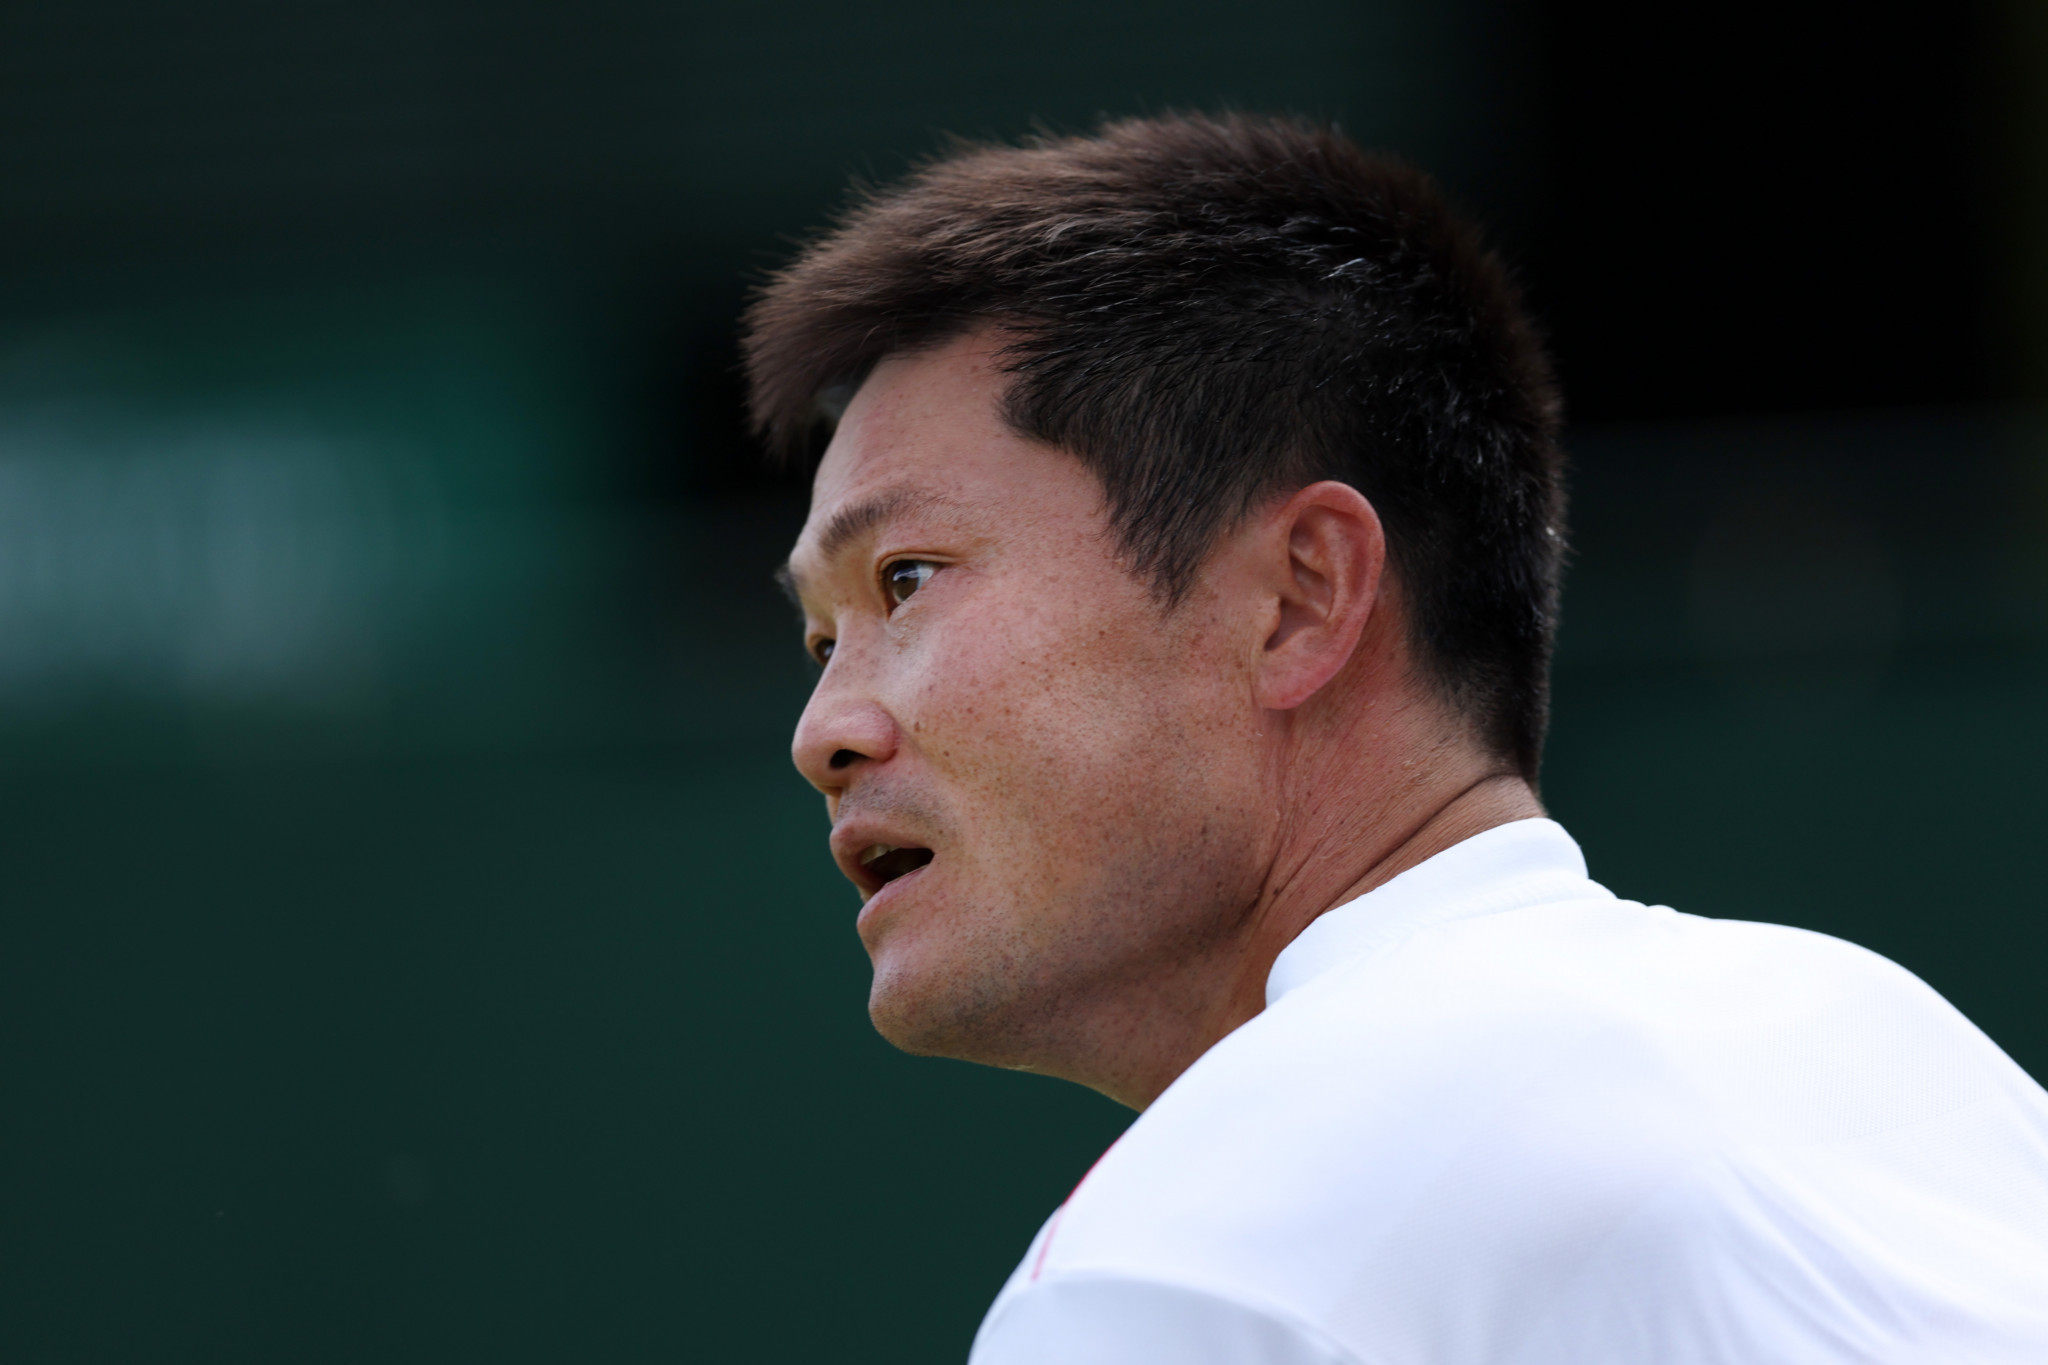 Shingo Kunieda won in straight sets against Joachim Gérard to advance to the wheelchair men's singles final ©Getty Images